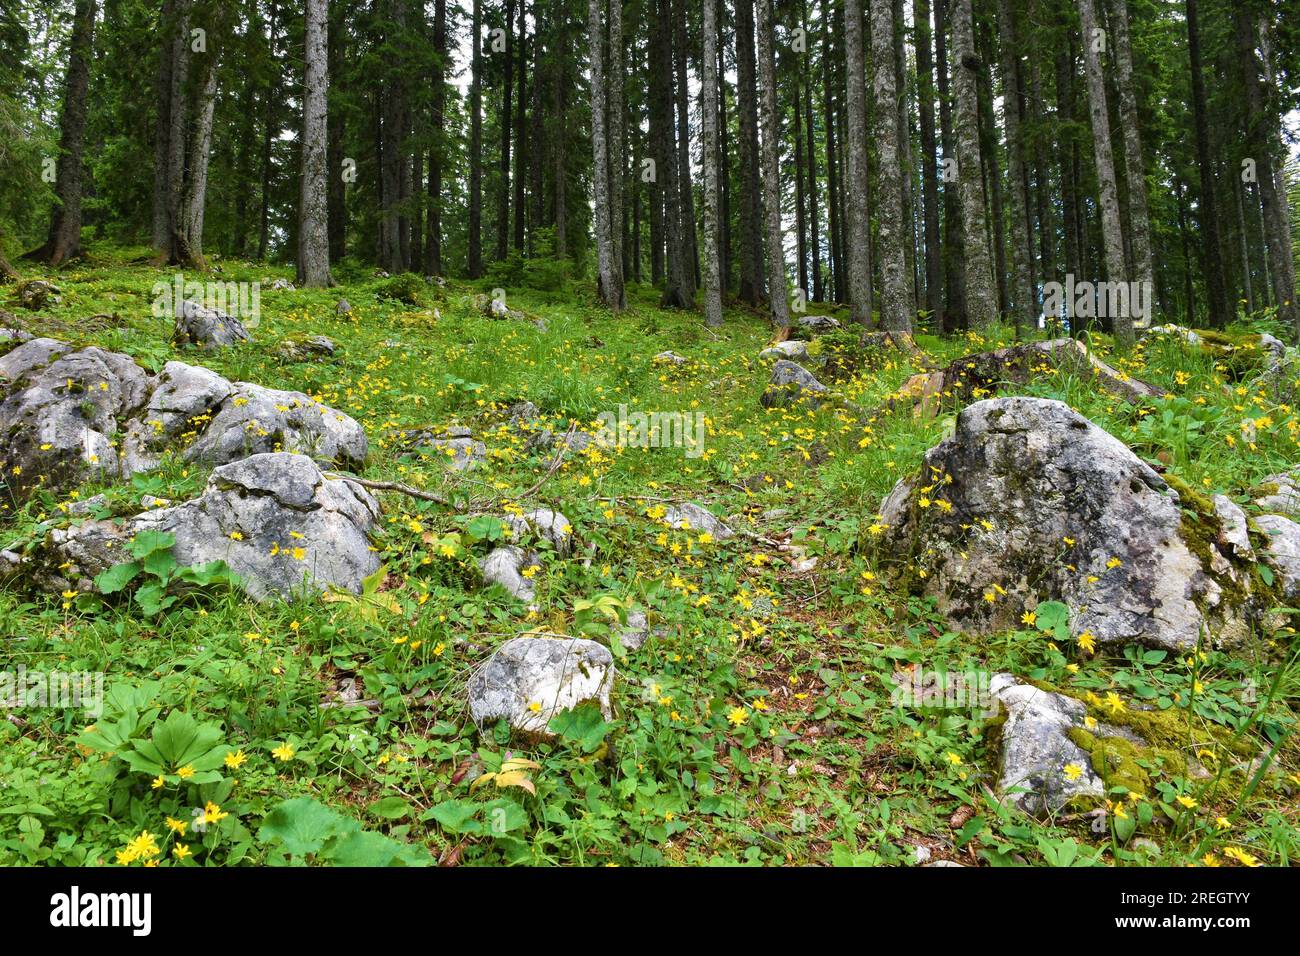 Conifer forest at Pokljuka, Slovenia with yellow hawkweed (Hieracium murorum) flowers growing at a clearing Stock Photo